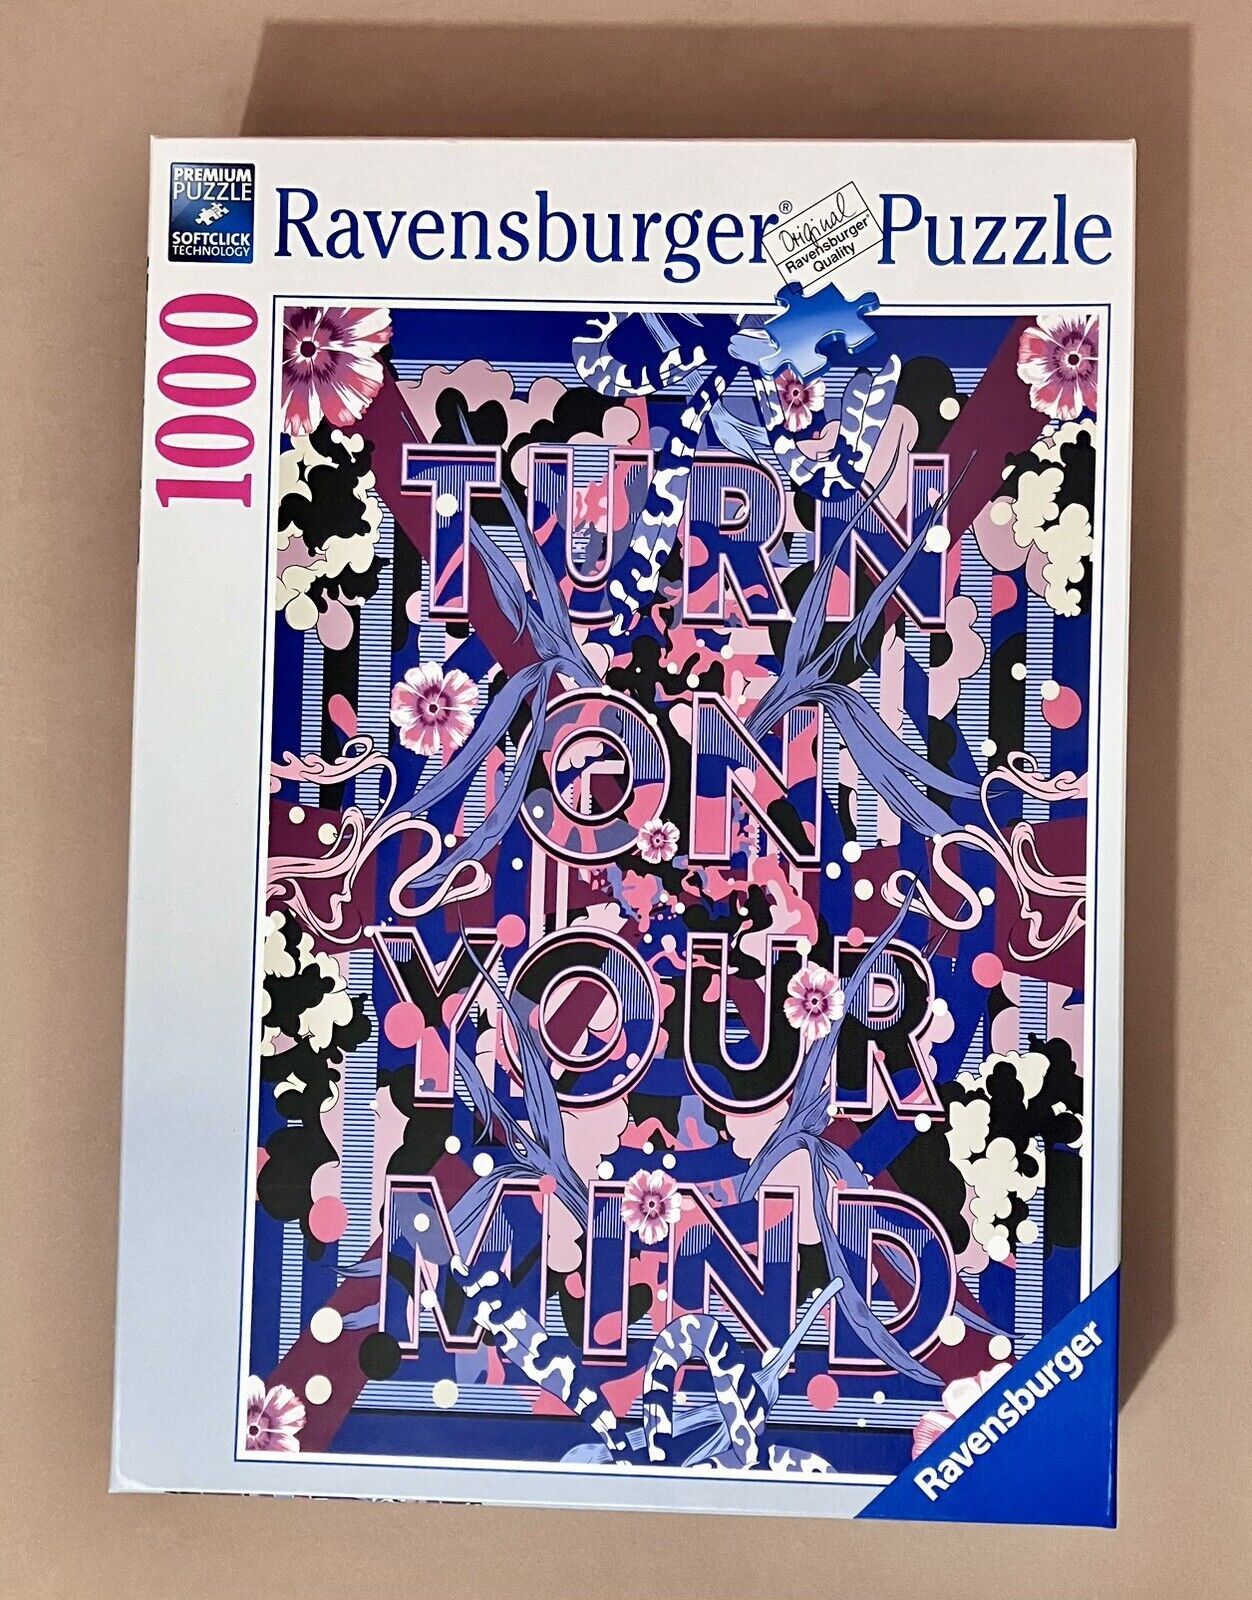 RAVENSBURGER 175956 - TURN ON YOUR MIND 1000 PIECE PUZZLE